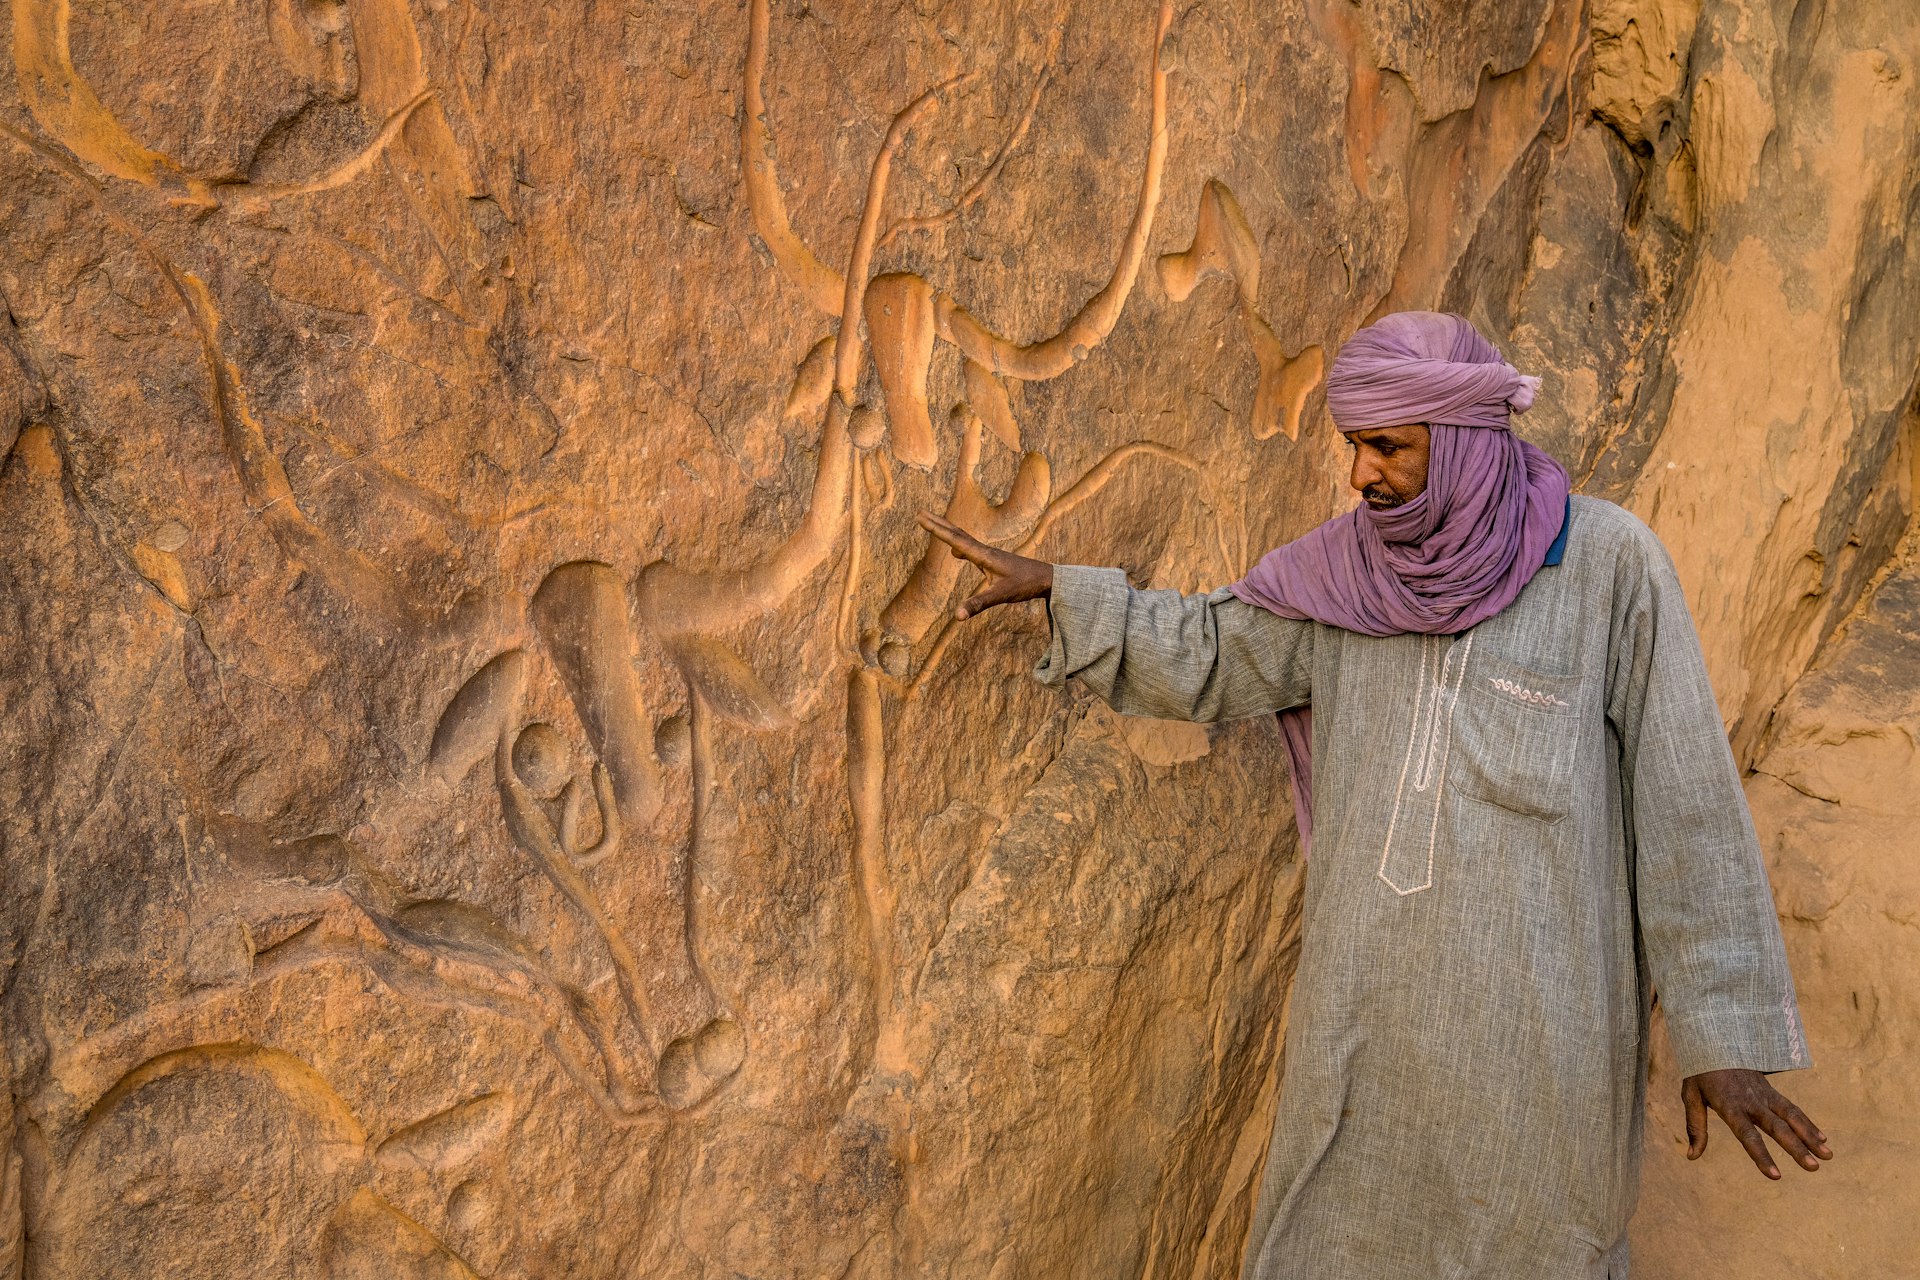 Guide, Abdessalam, pointing out the crying cows rock carving in Tassili National Park